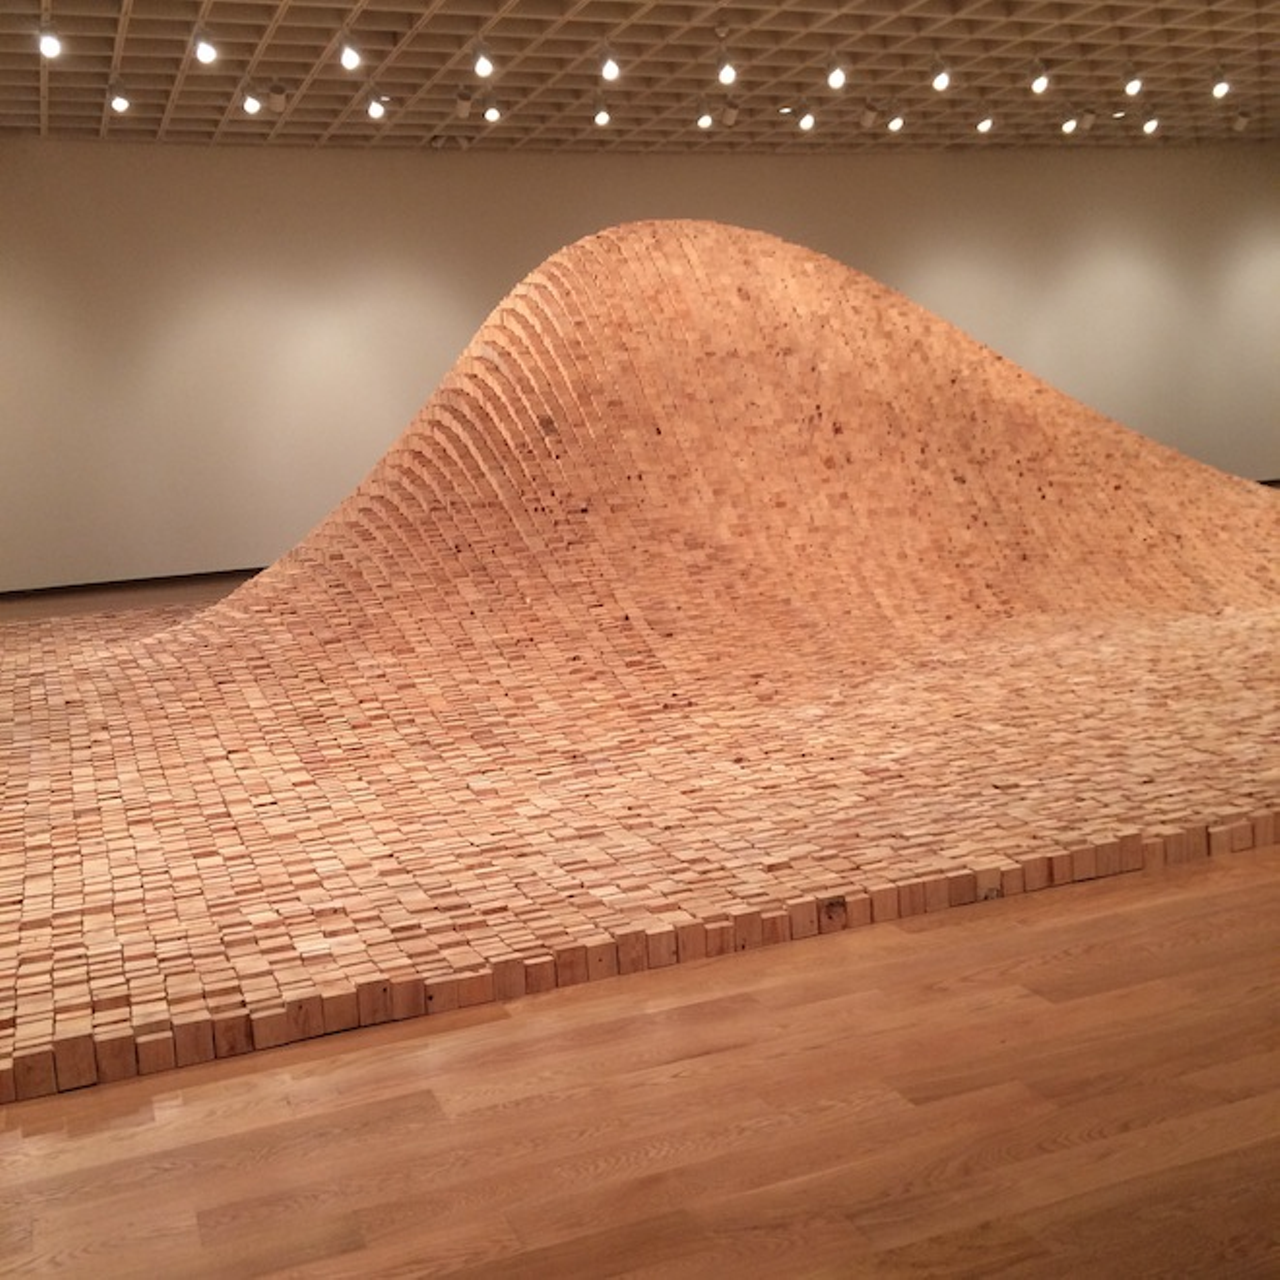 Huge installation "2x4 Landscape" from Maya Lin exhibition The History of Water at Orlando Museum of Art